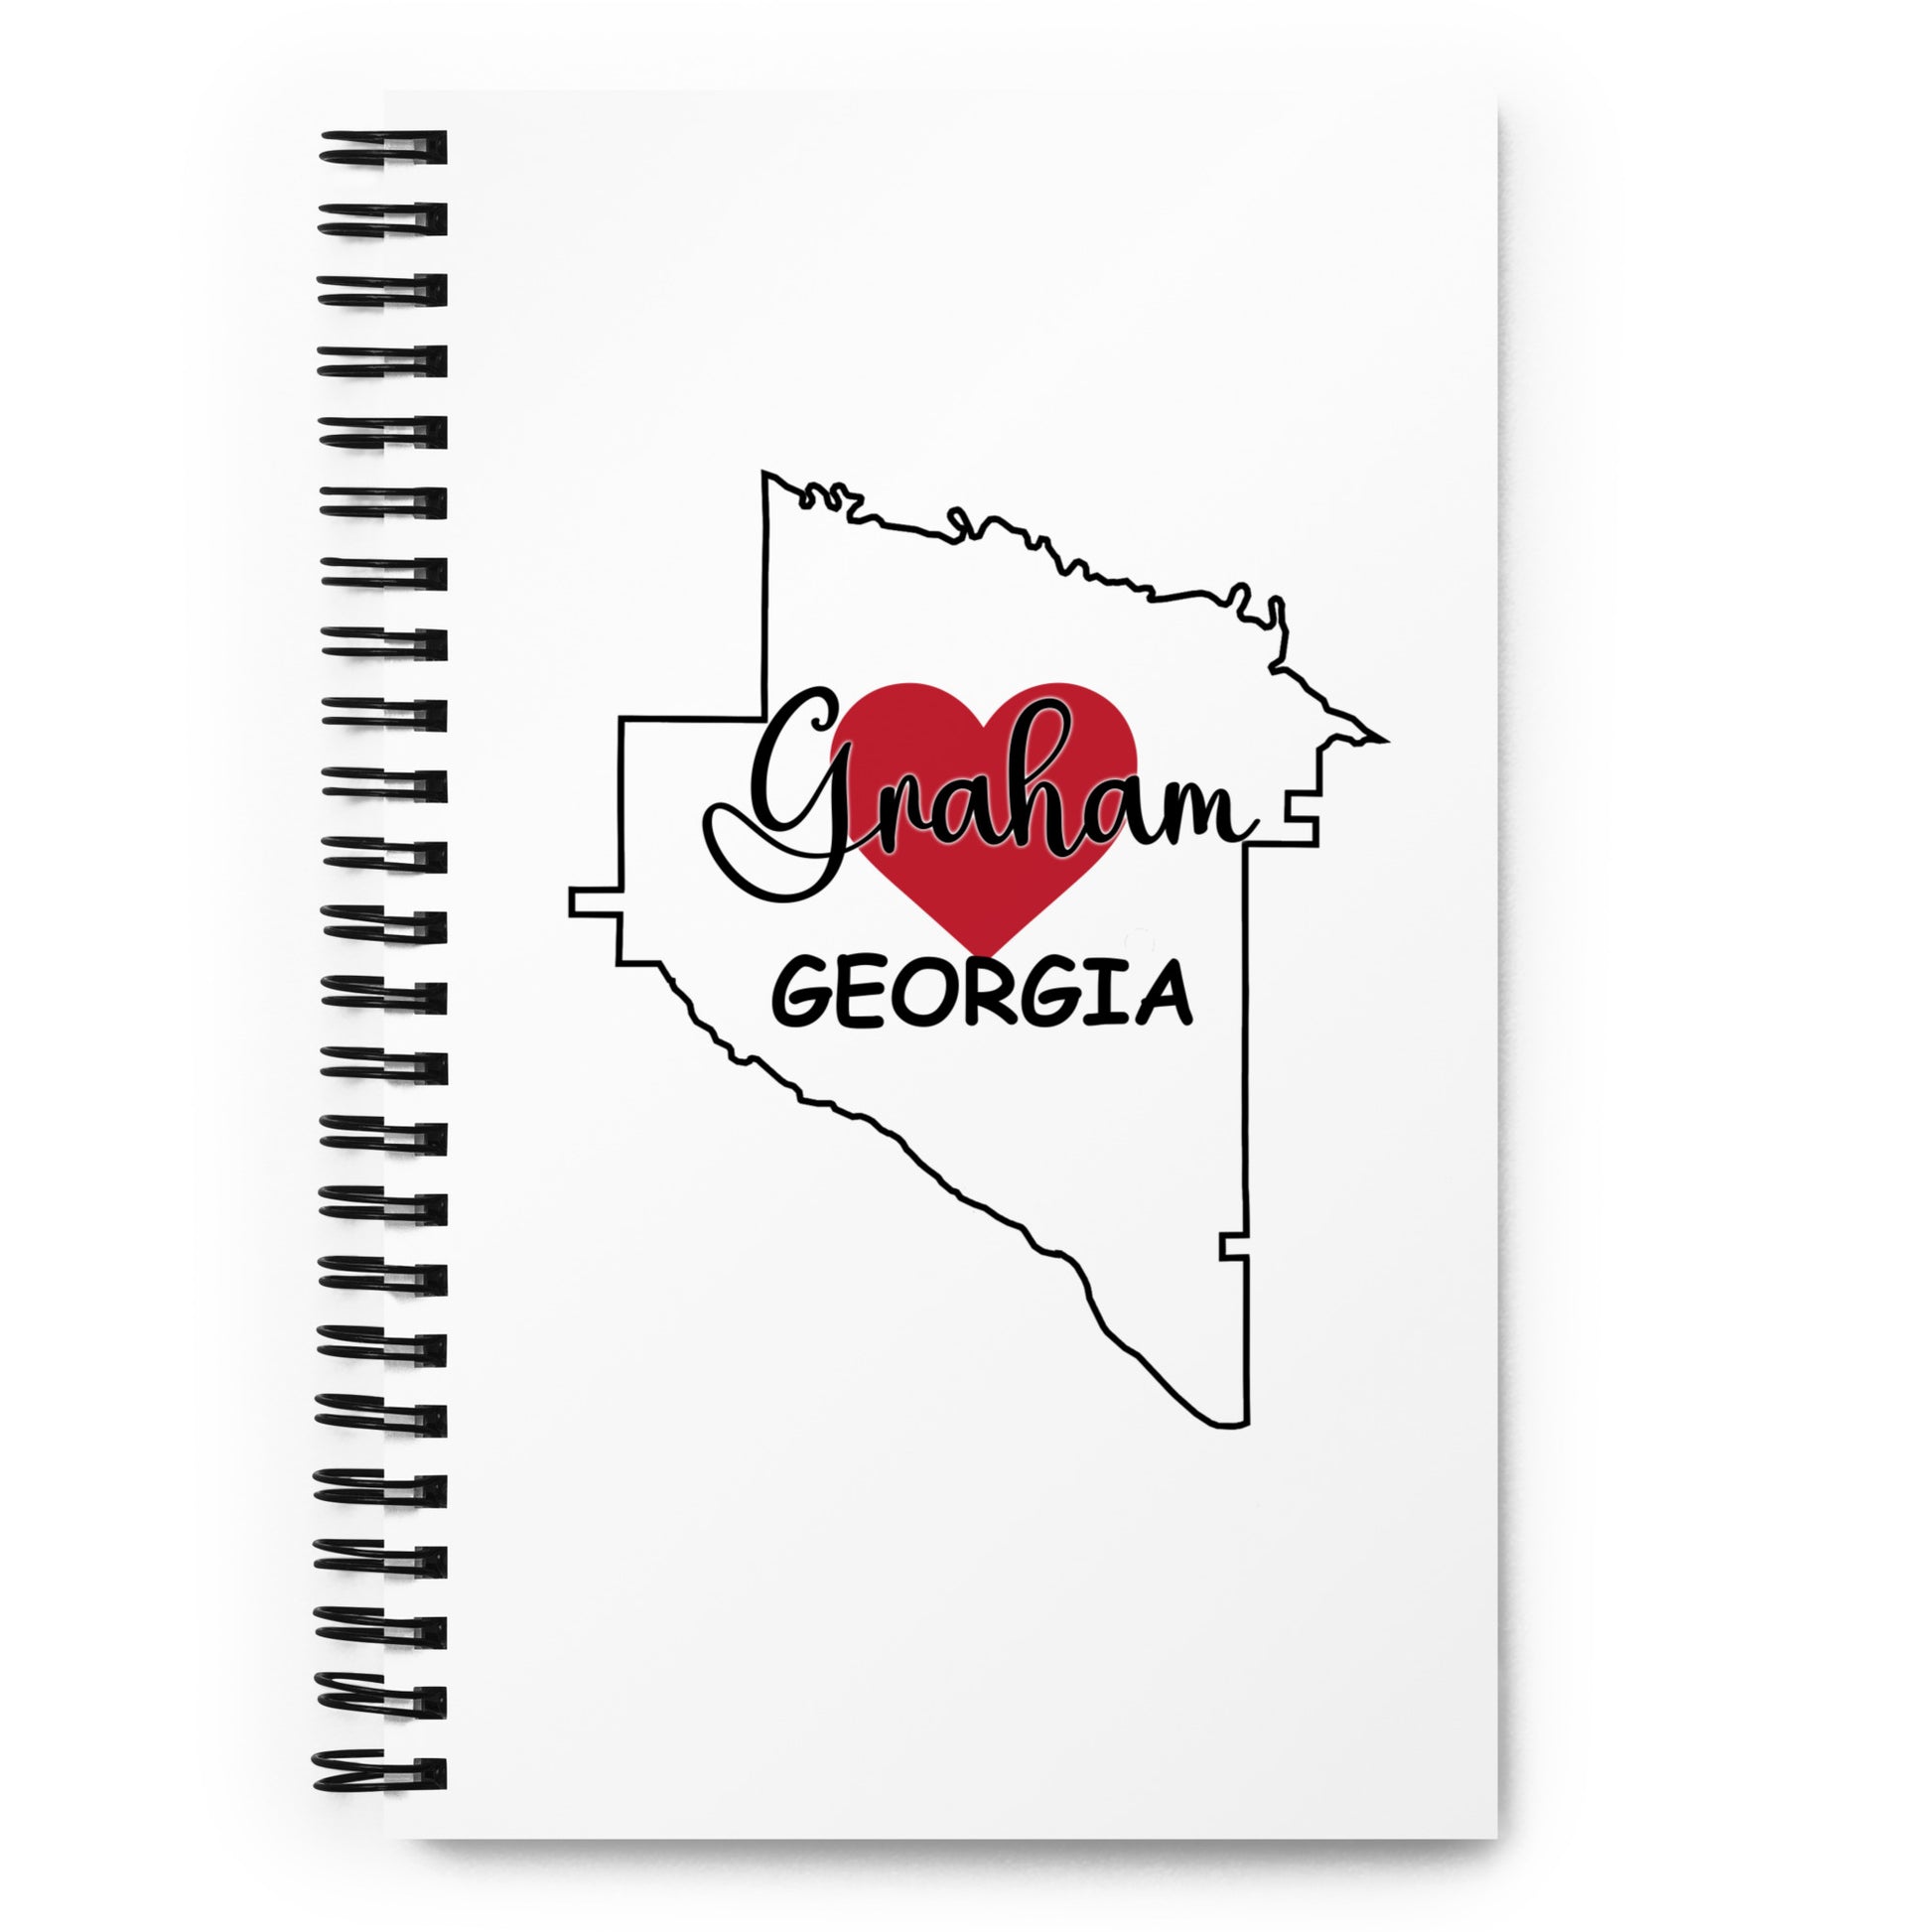 Graham Georgia Heart in County Outline Spiral Notebook Journal Diary